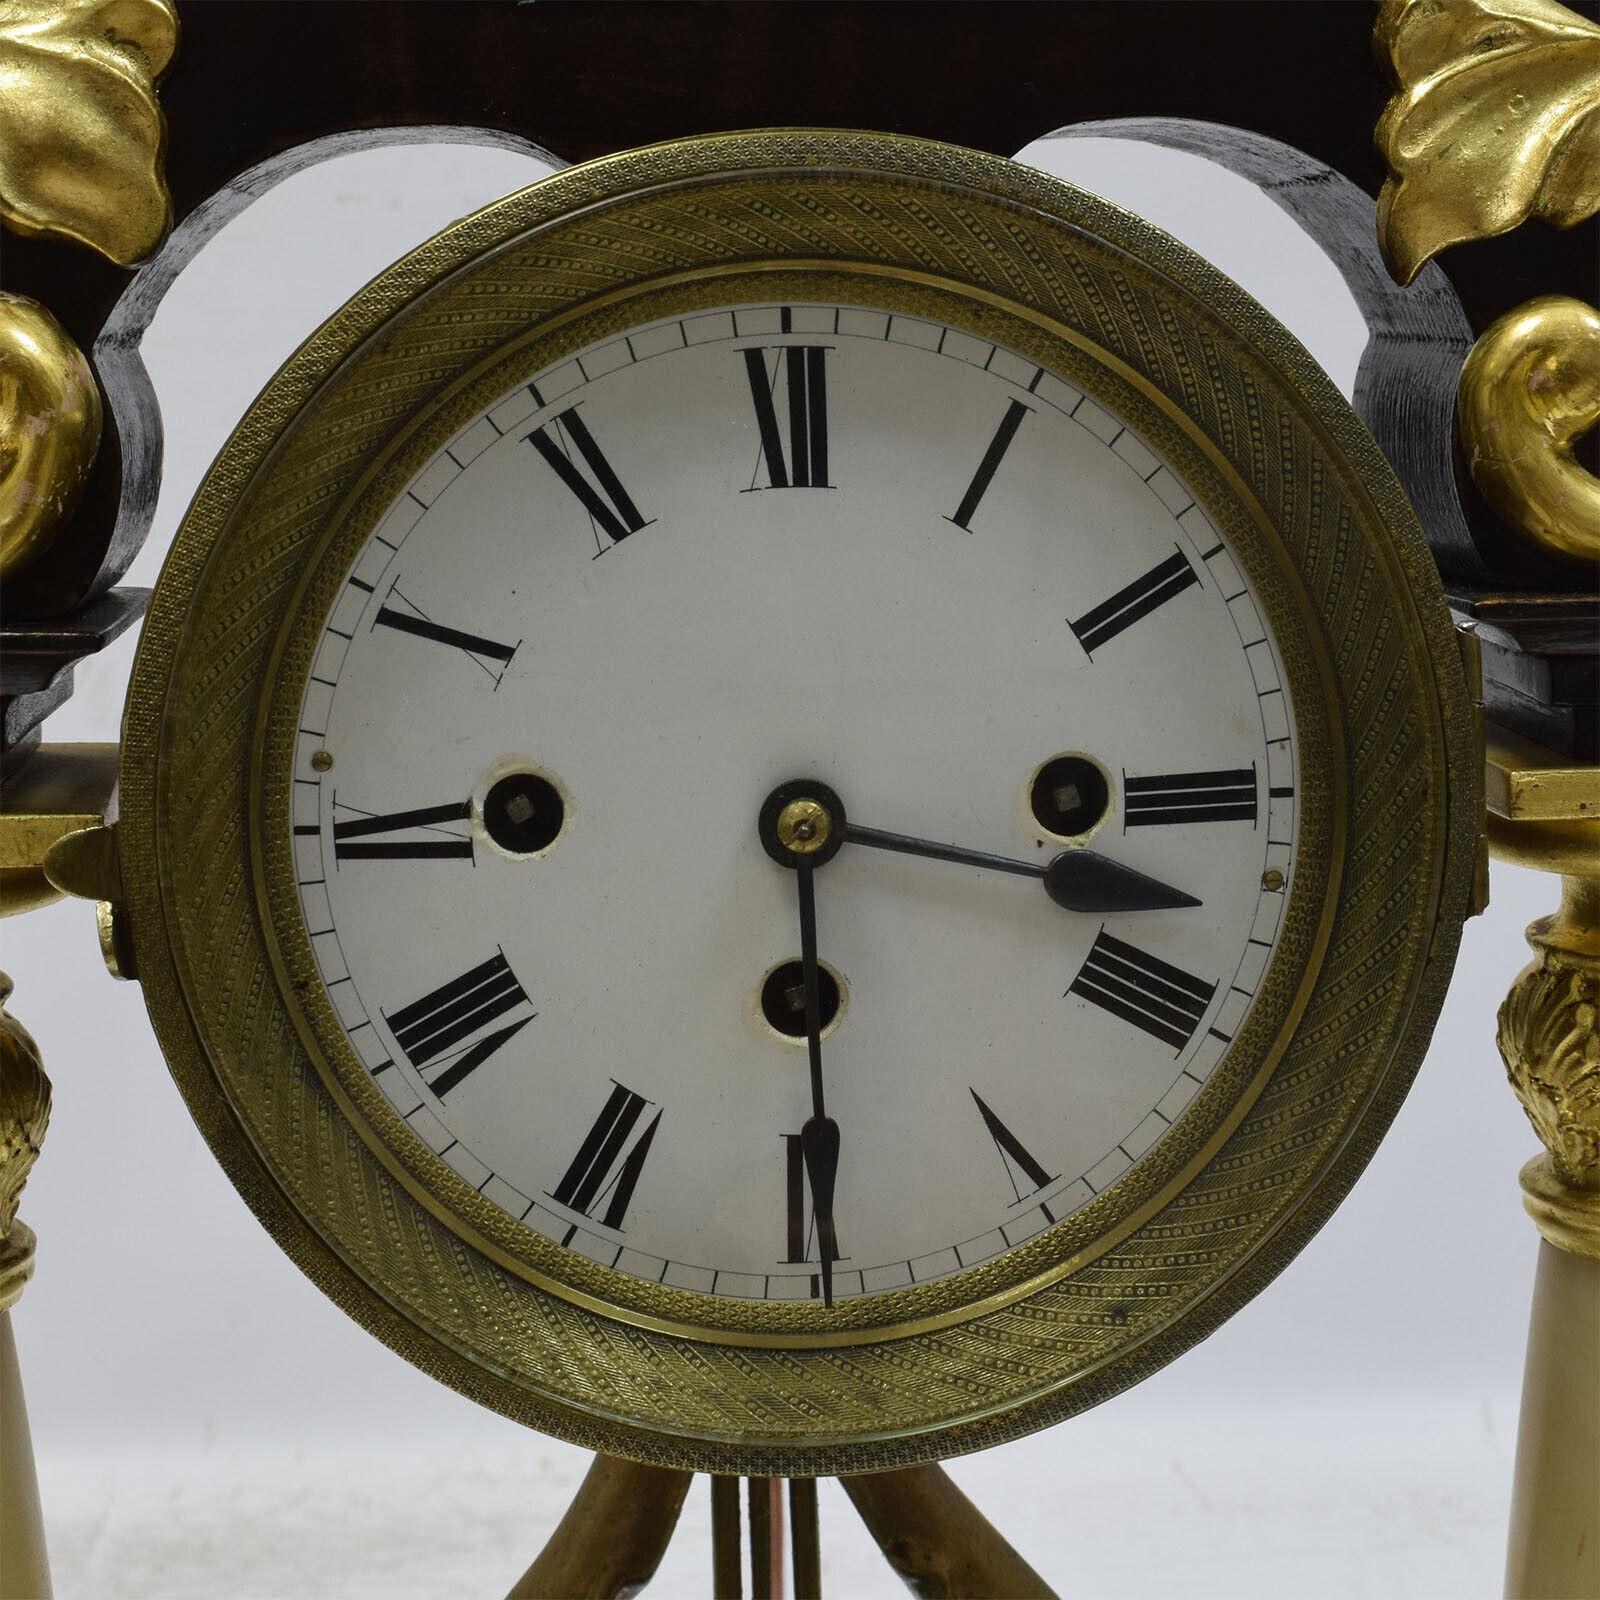 19th Century Functional Column Clock, Antique Mantel Clock with Portico, 1G03 For Sale 3